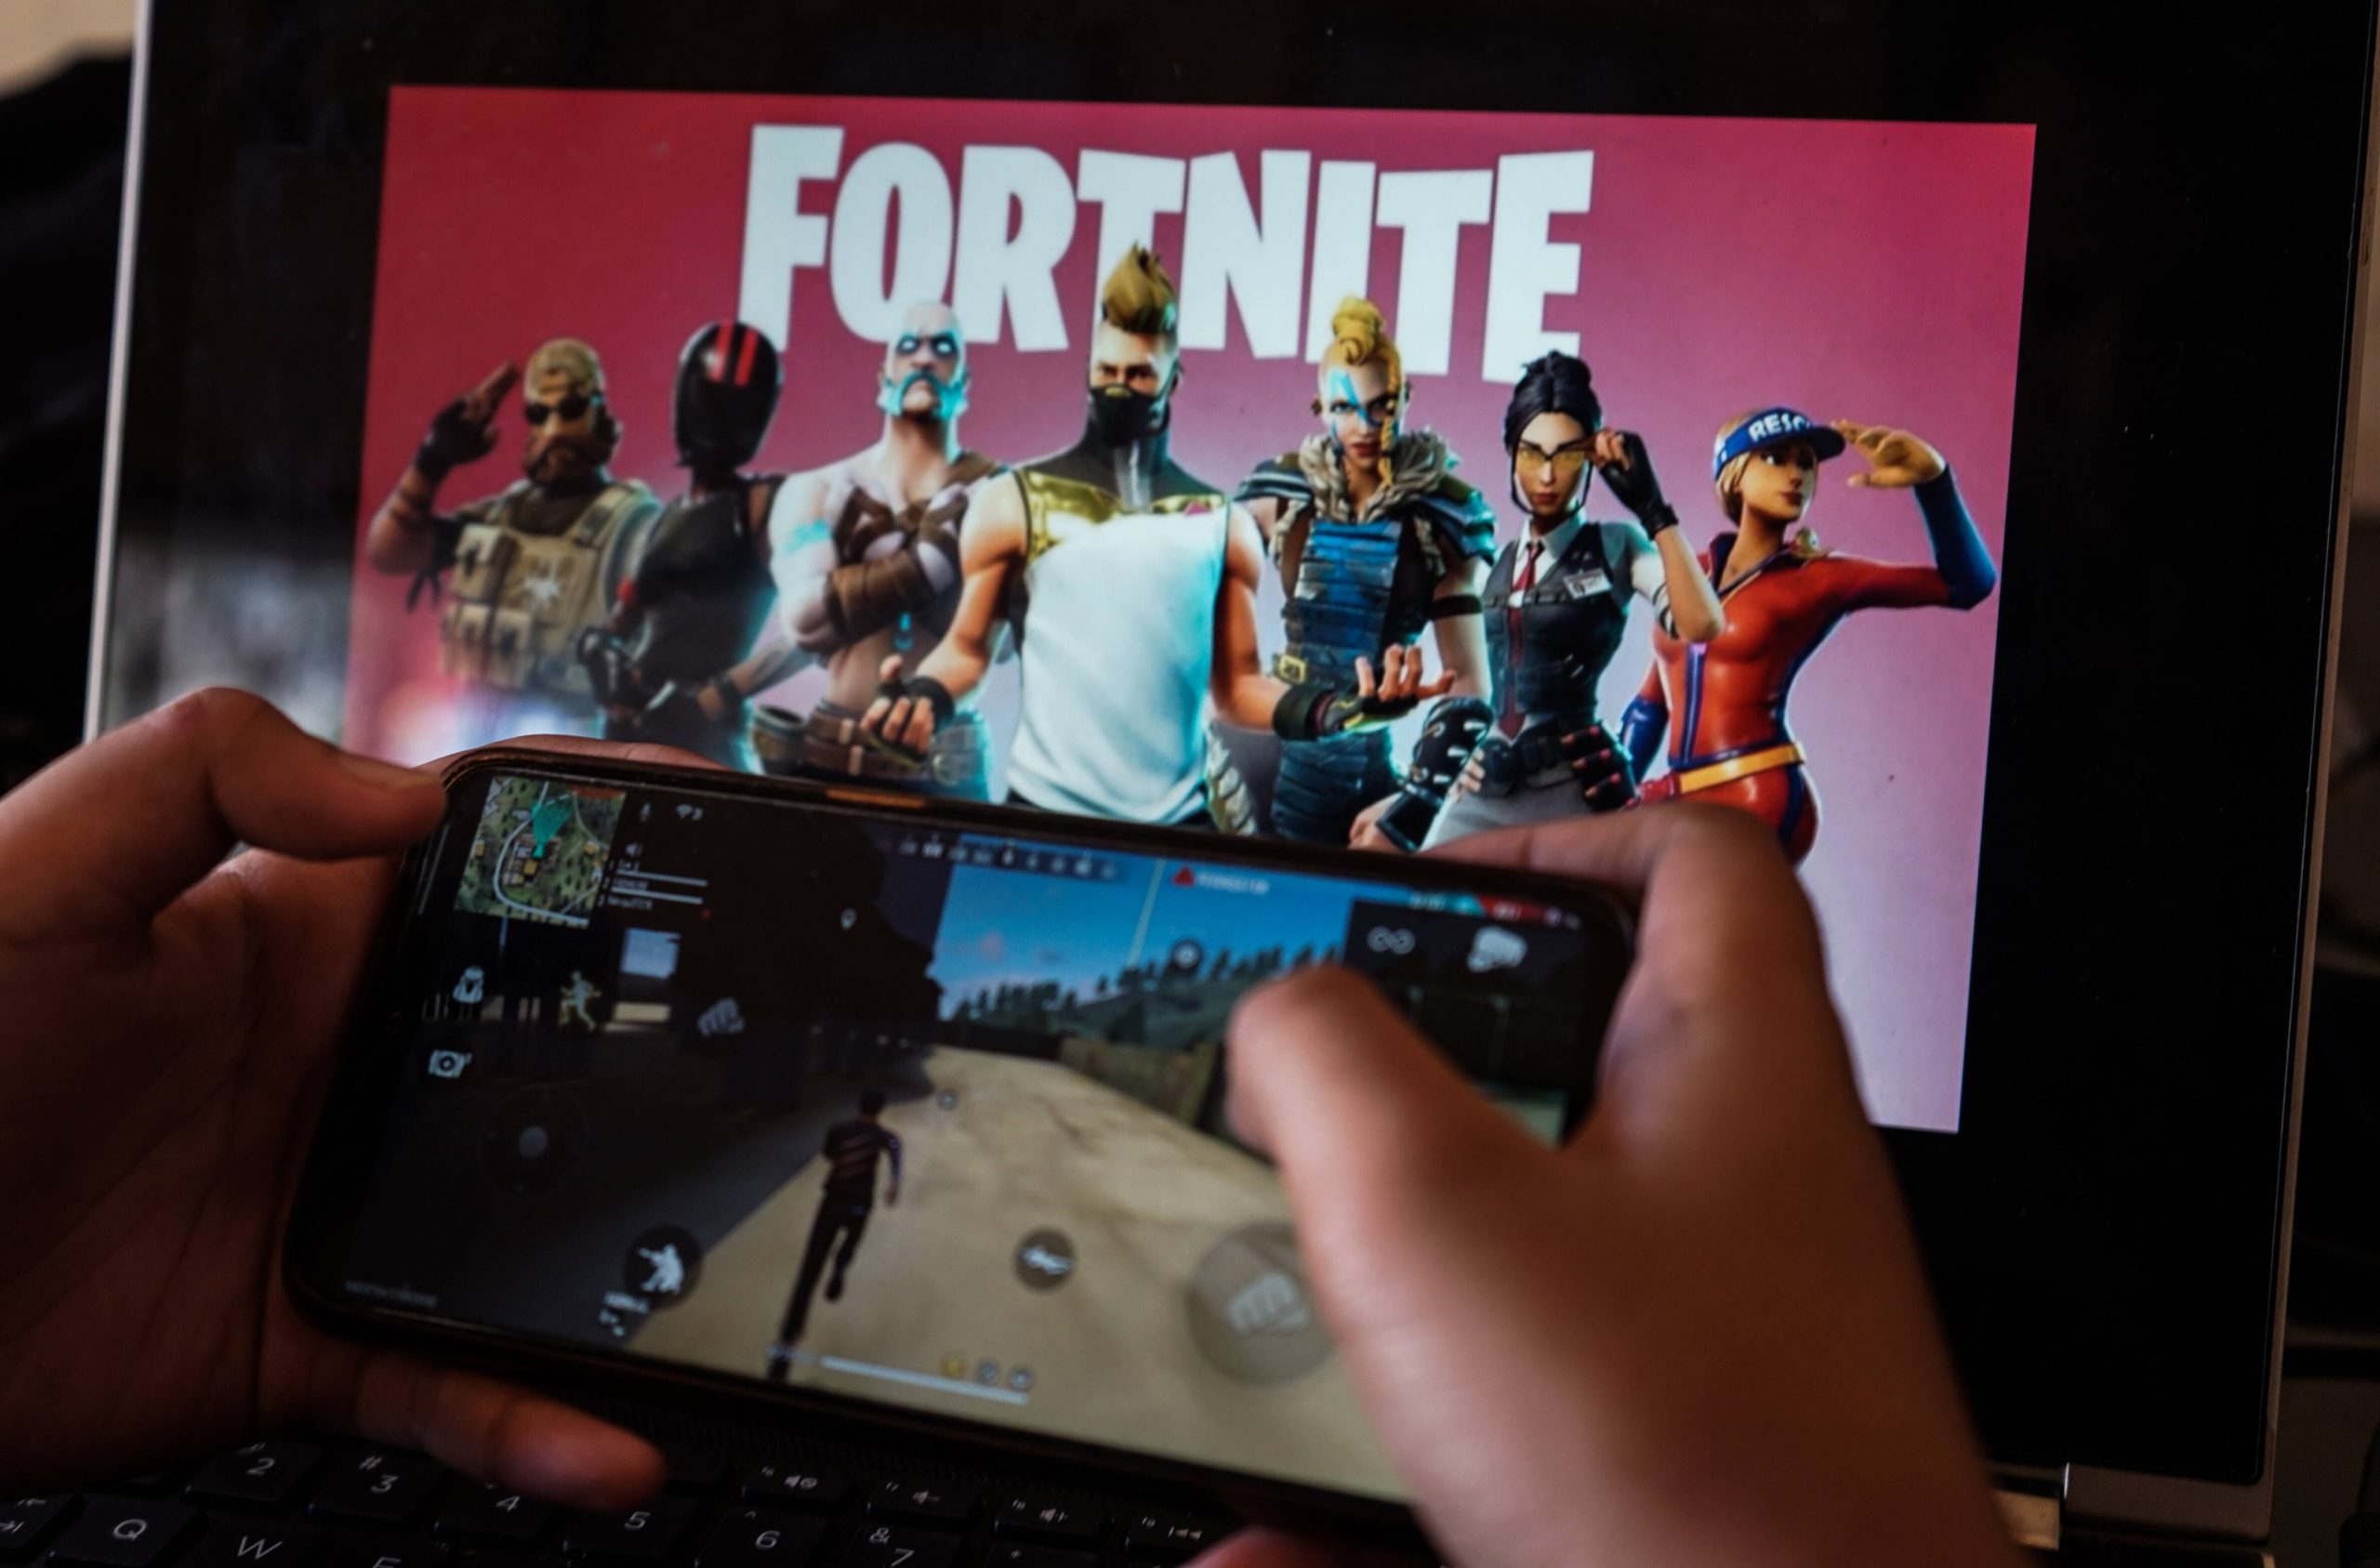 A child is playing a game on a cellphone with a picture of the Fortnite game on the computer screen in the background